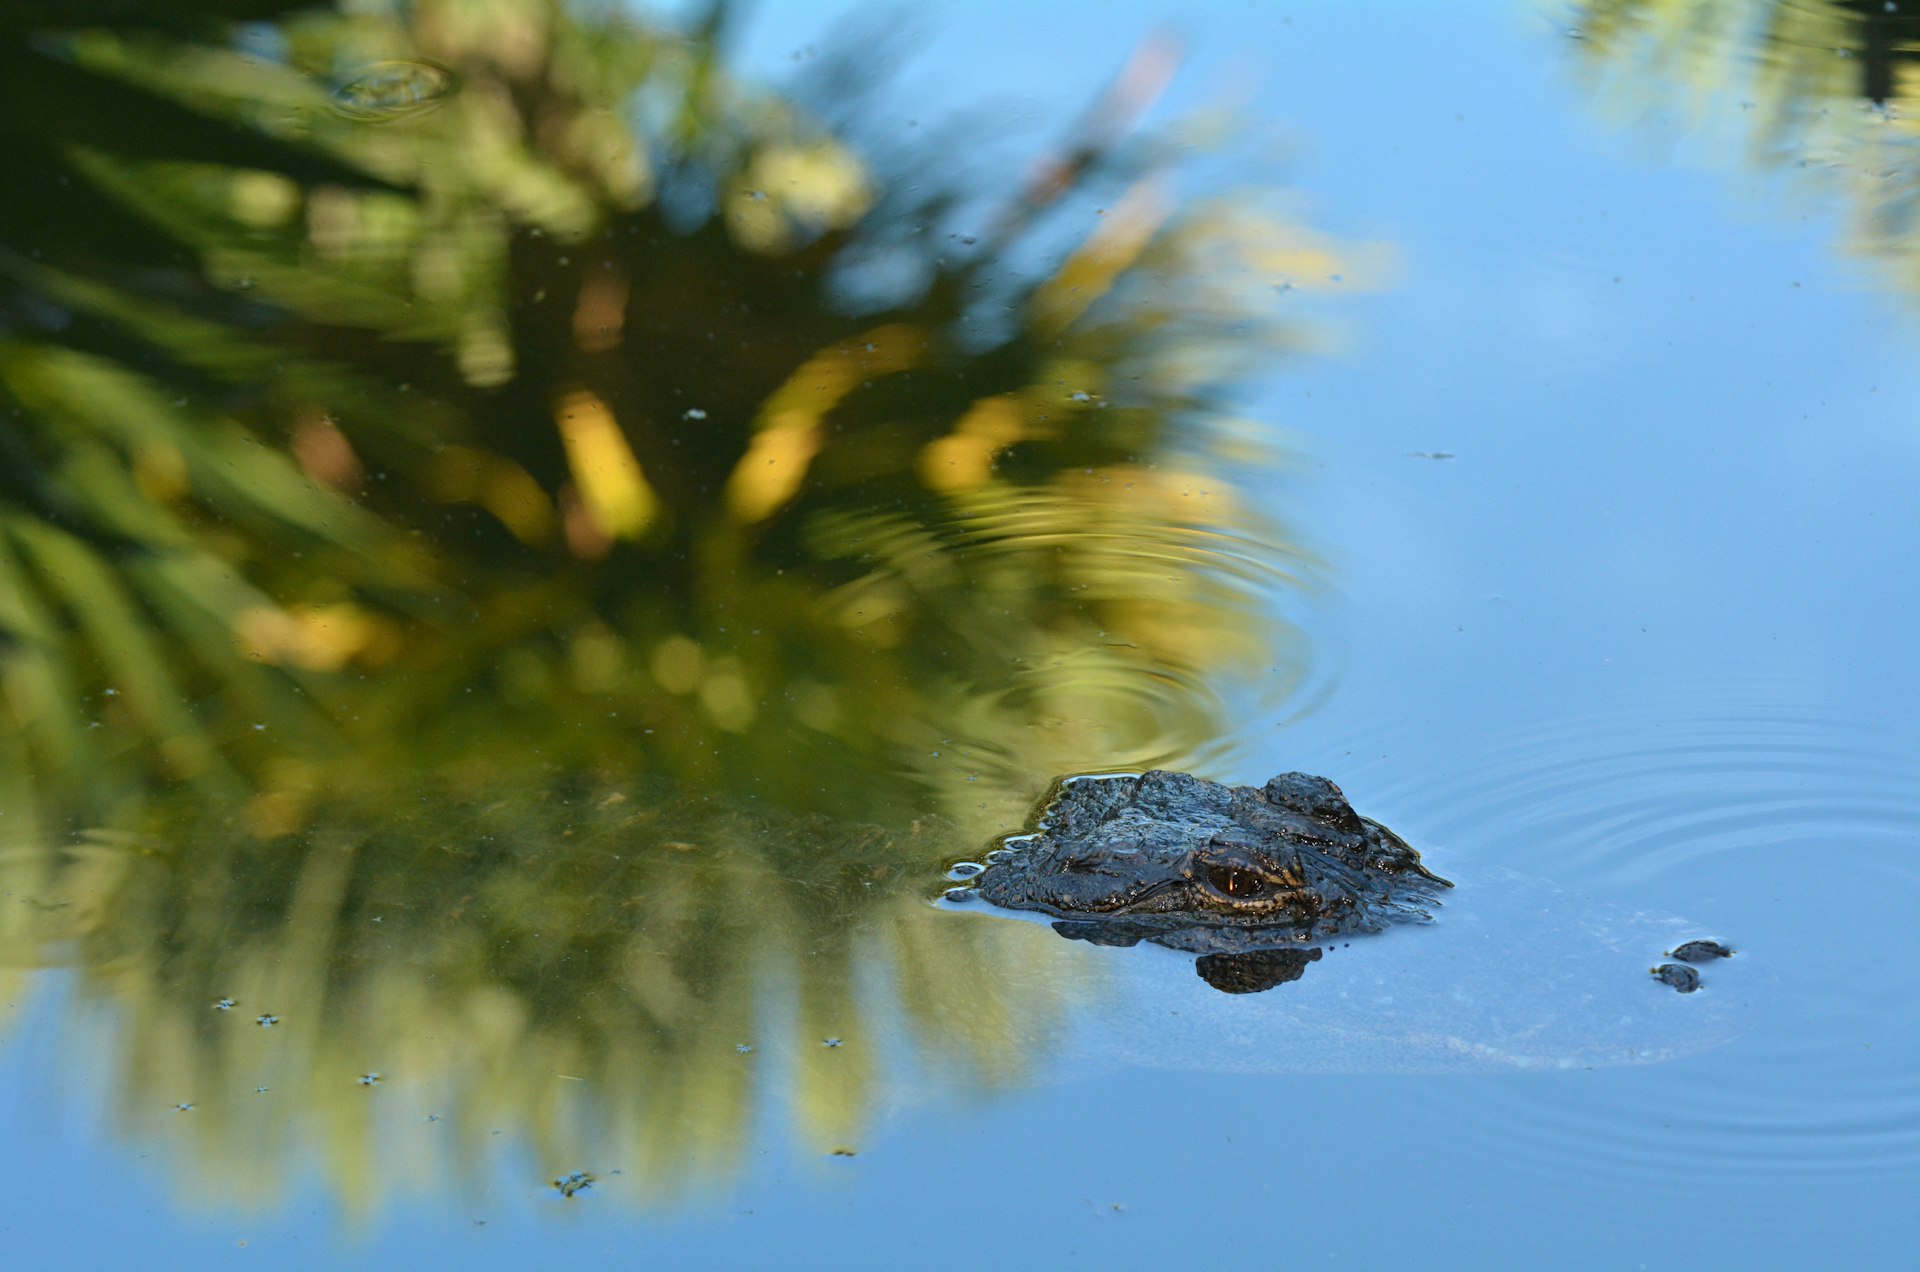 An alligator's eyes and snout poke above the water that reflects a tall tree above